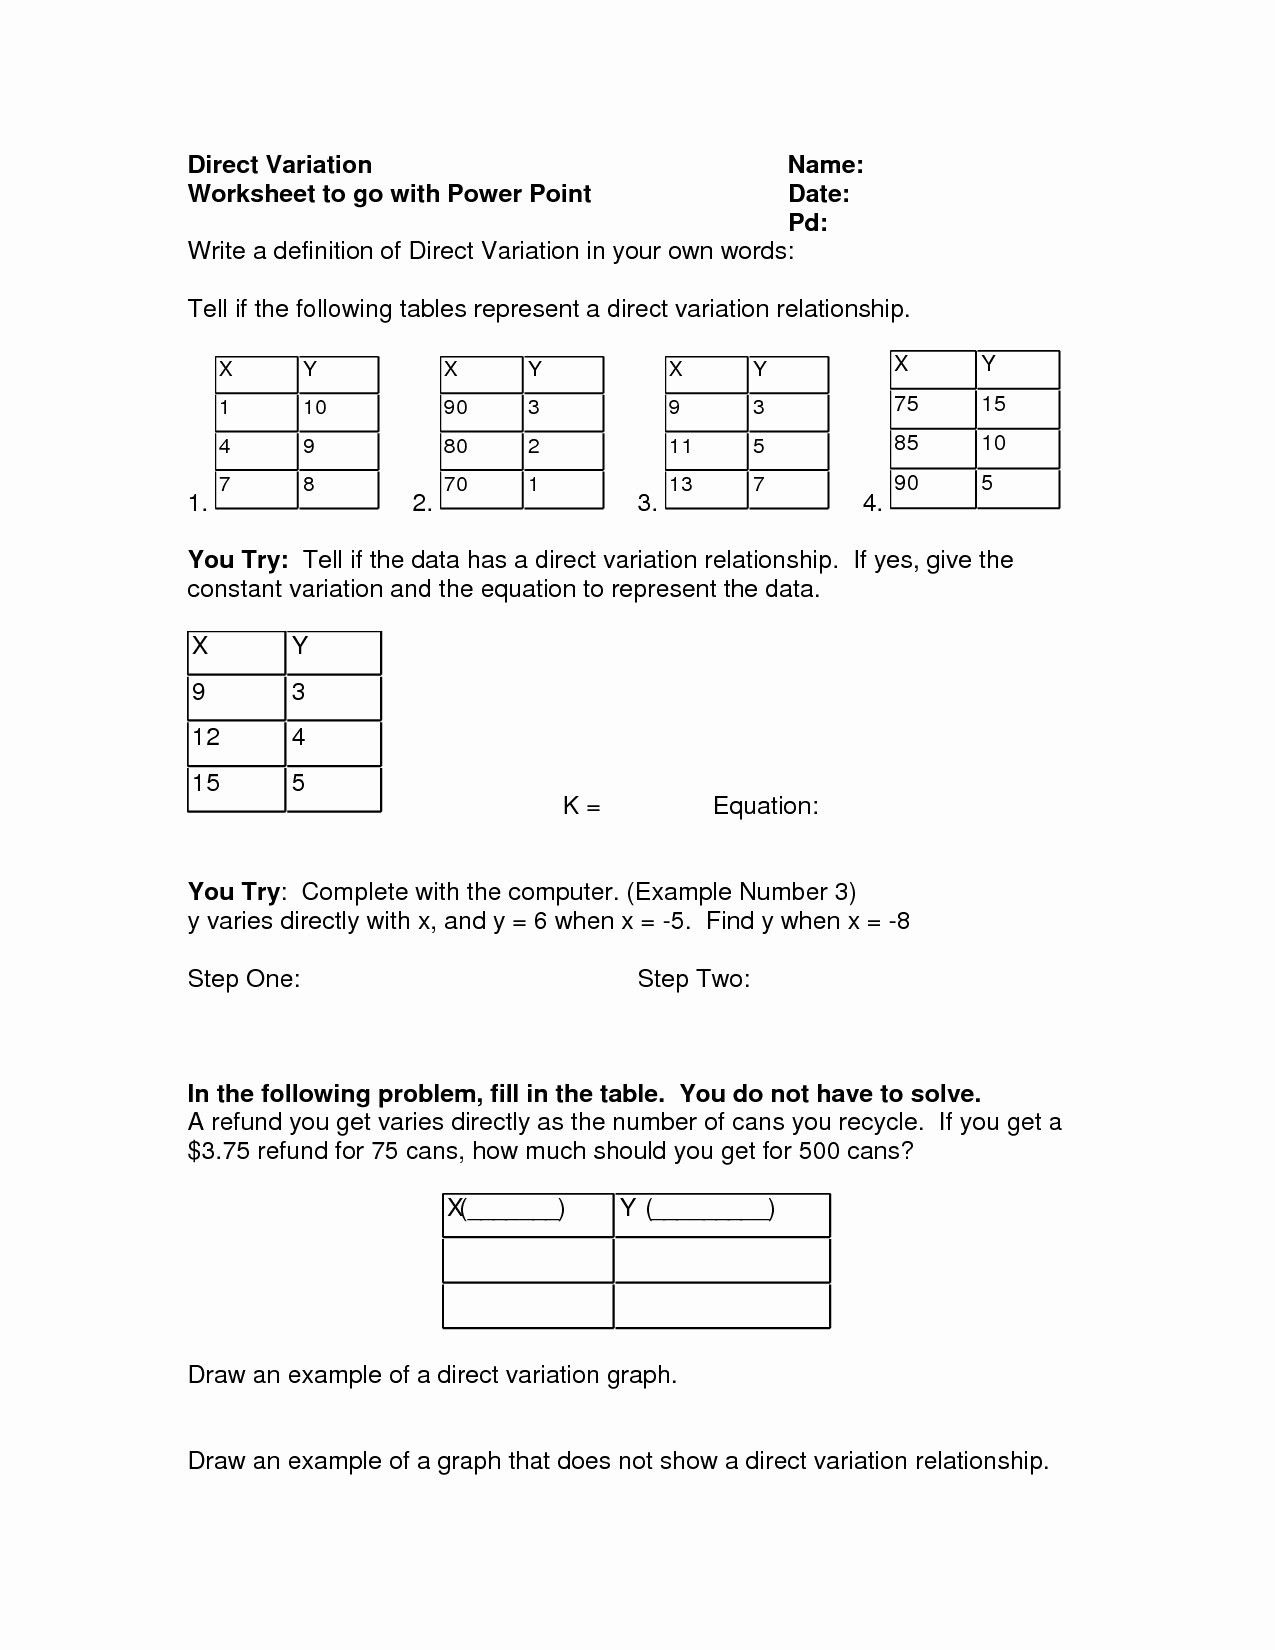 direct-and-inverse-variation-worksheet-answers-db-excel